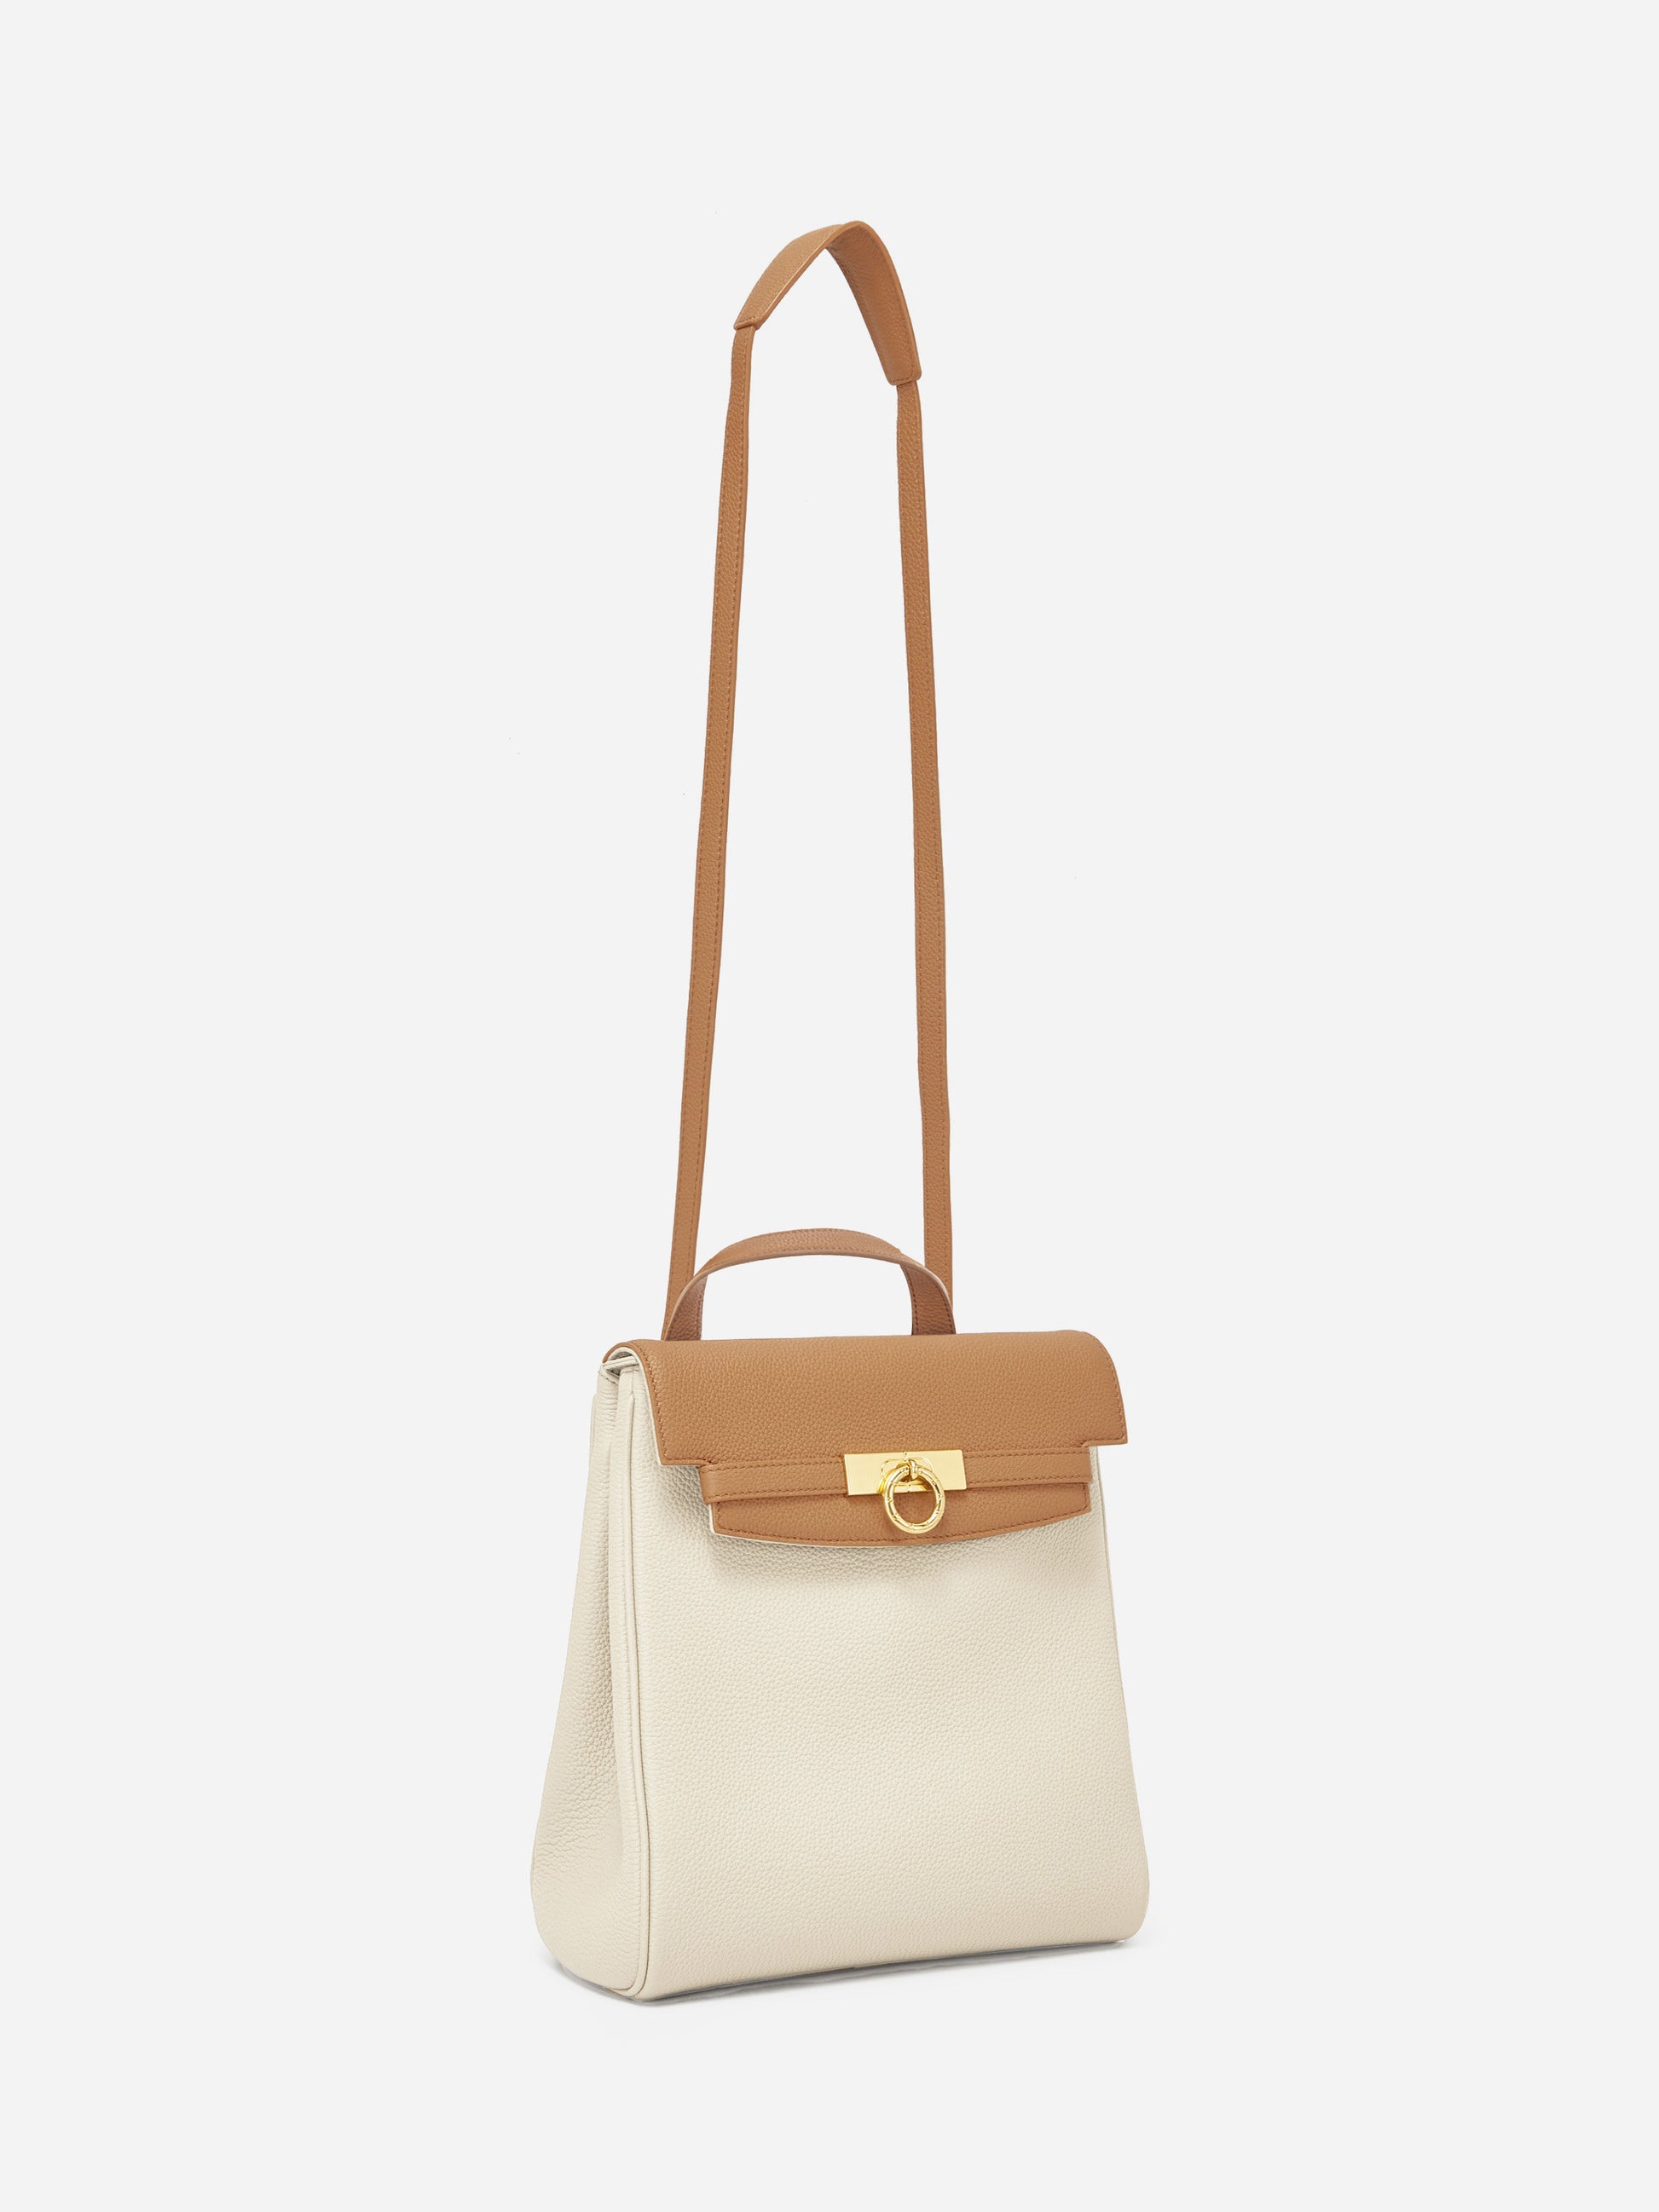 Unlocked Backpack in Cream Cappuccino | Parisa Wang | Featured